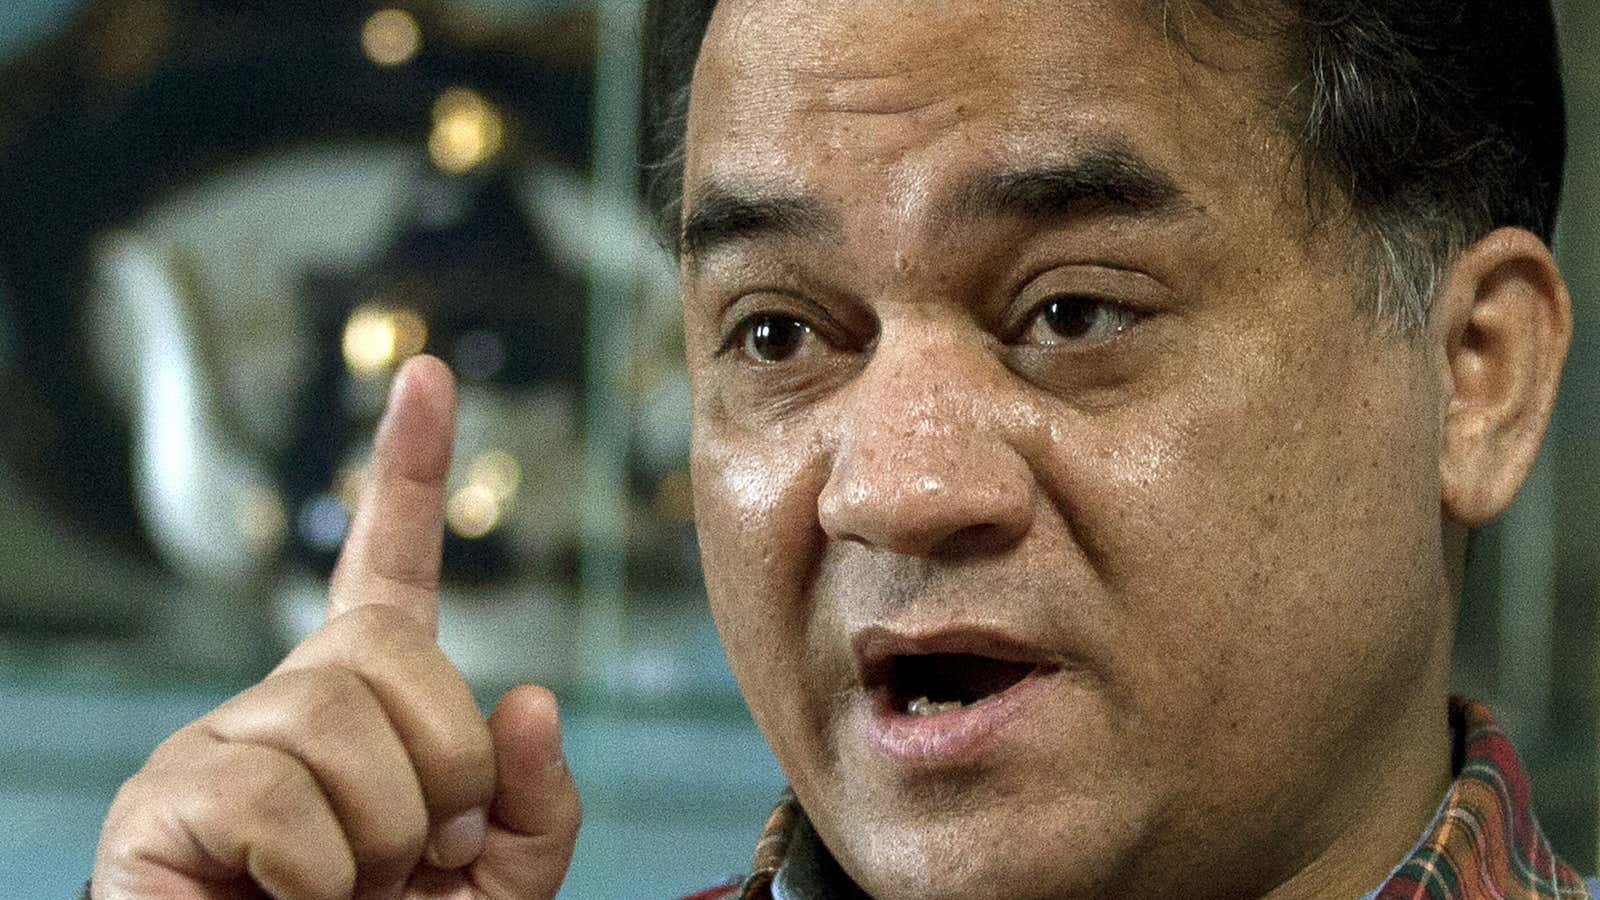 Ilham Tohti was sentenced to life in prison at age 44.